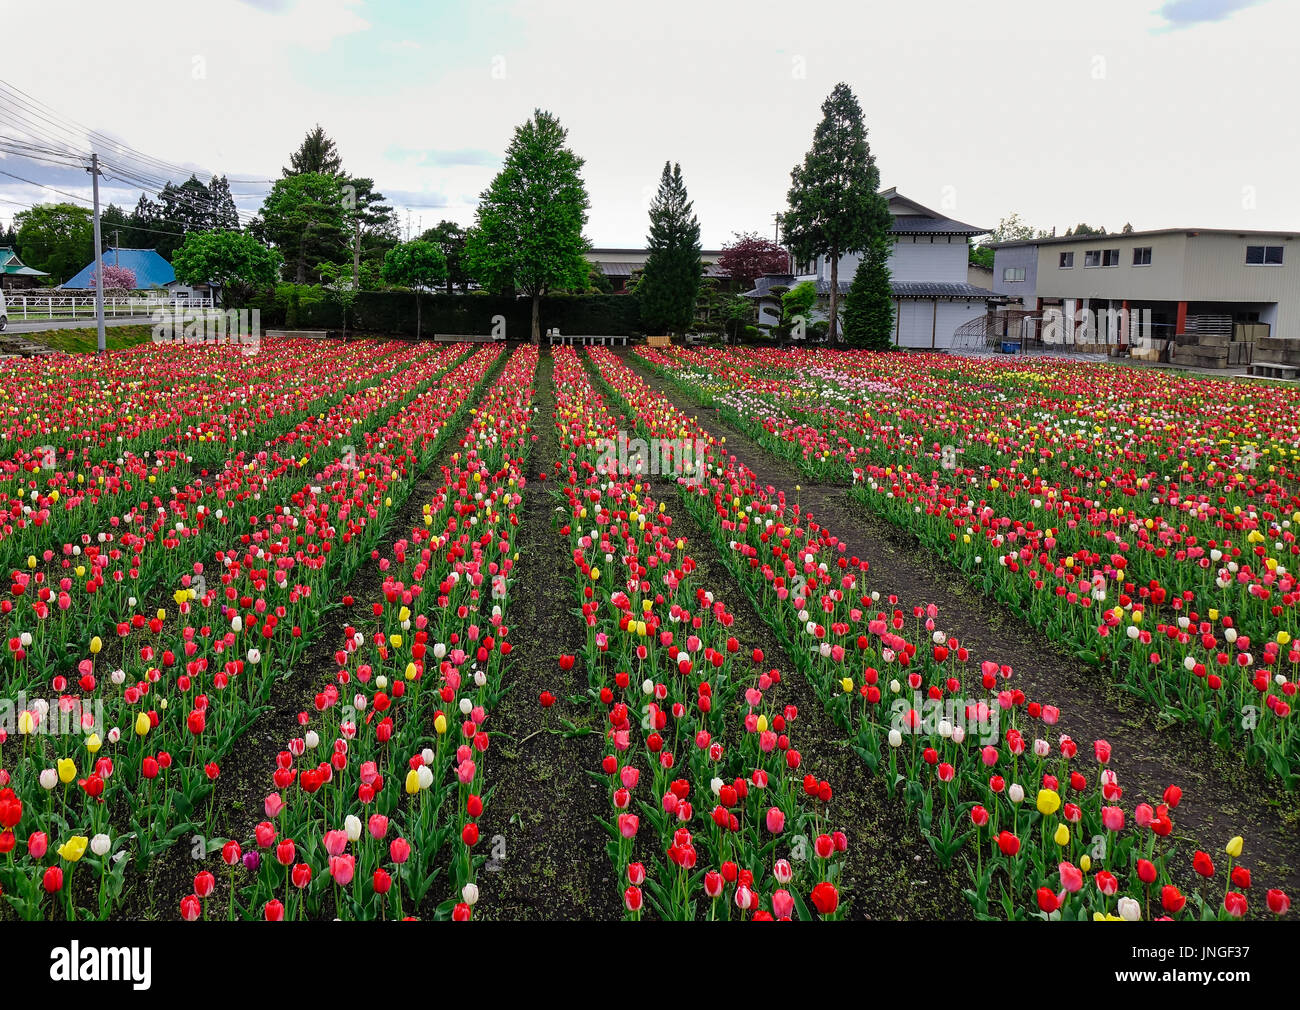 Tulip flowers at sunny day in Akita, Japan. Akita Prefecture (Akita-ken) is a prefecture of Japan located in the Tohoku region of northern Honshu. Stock Photo